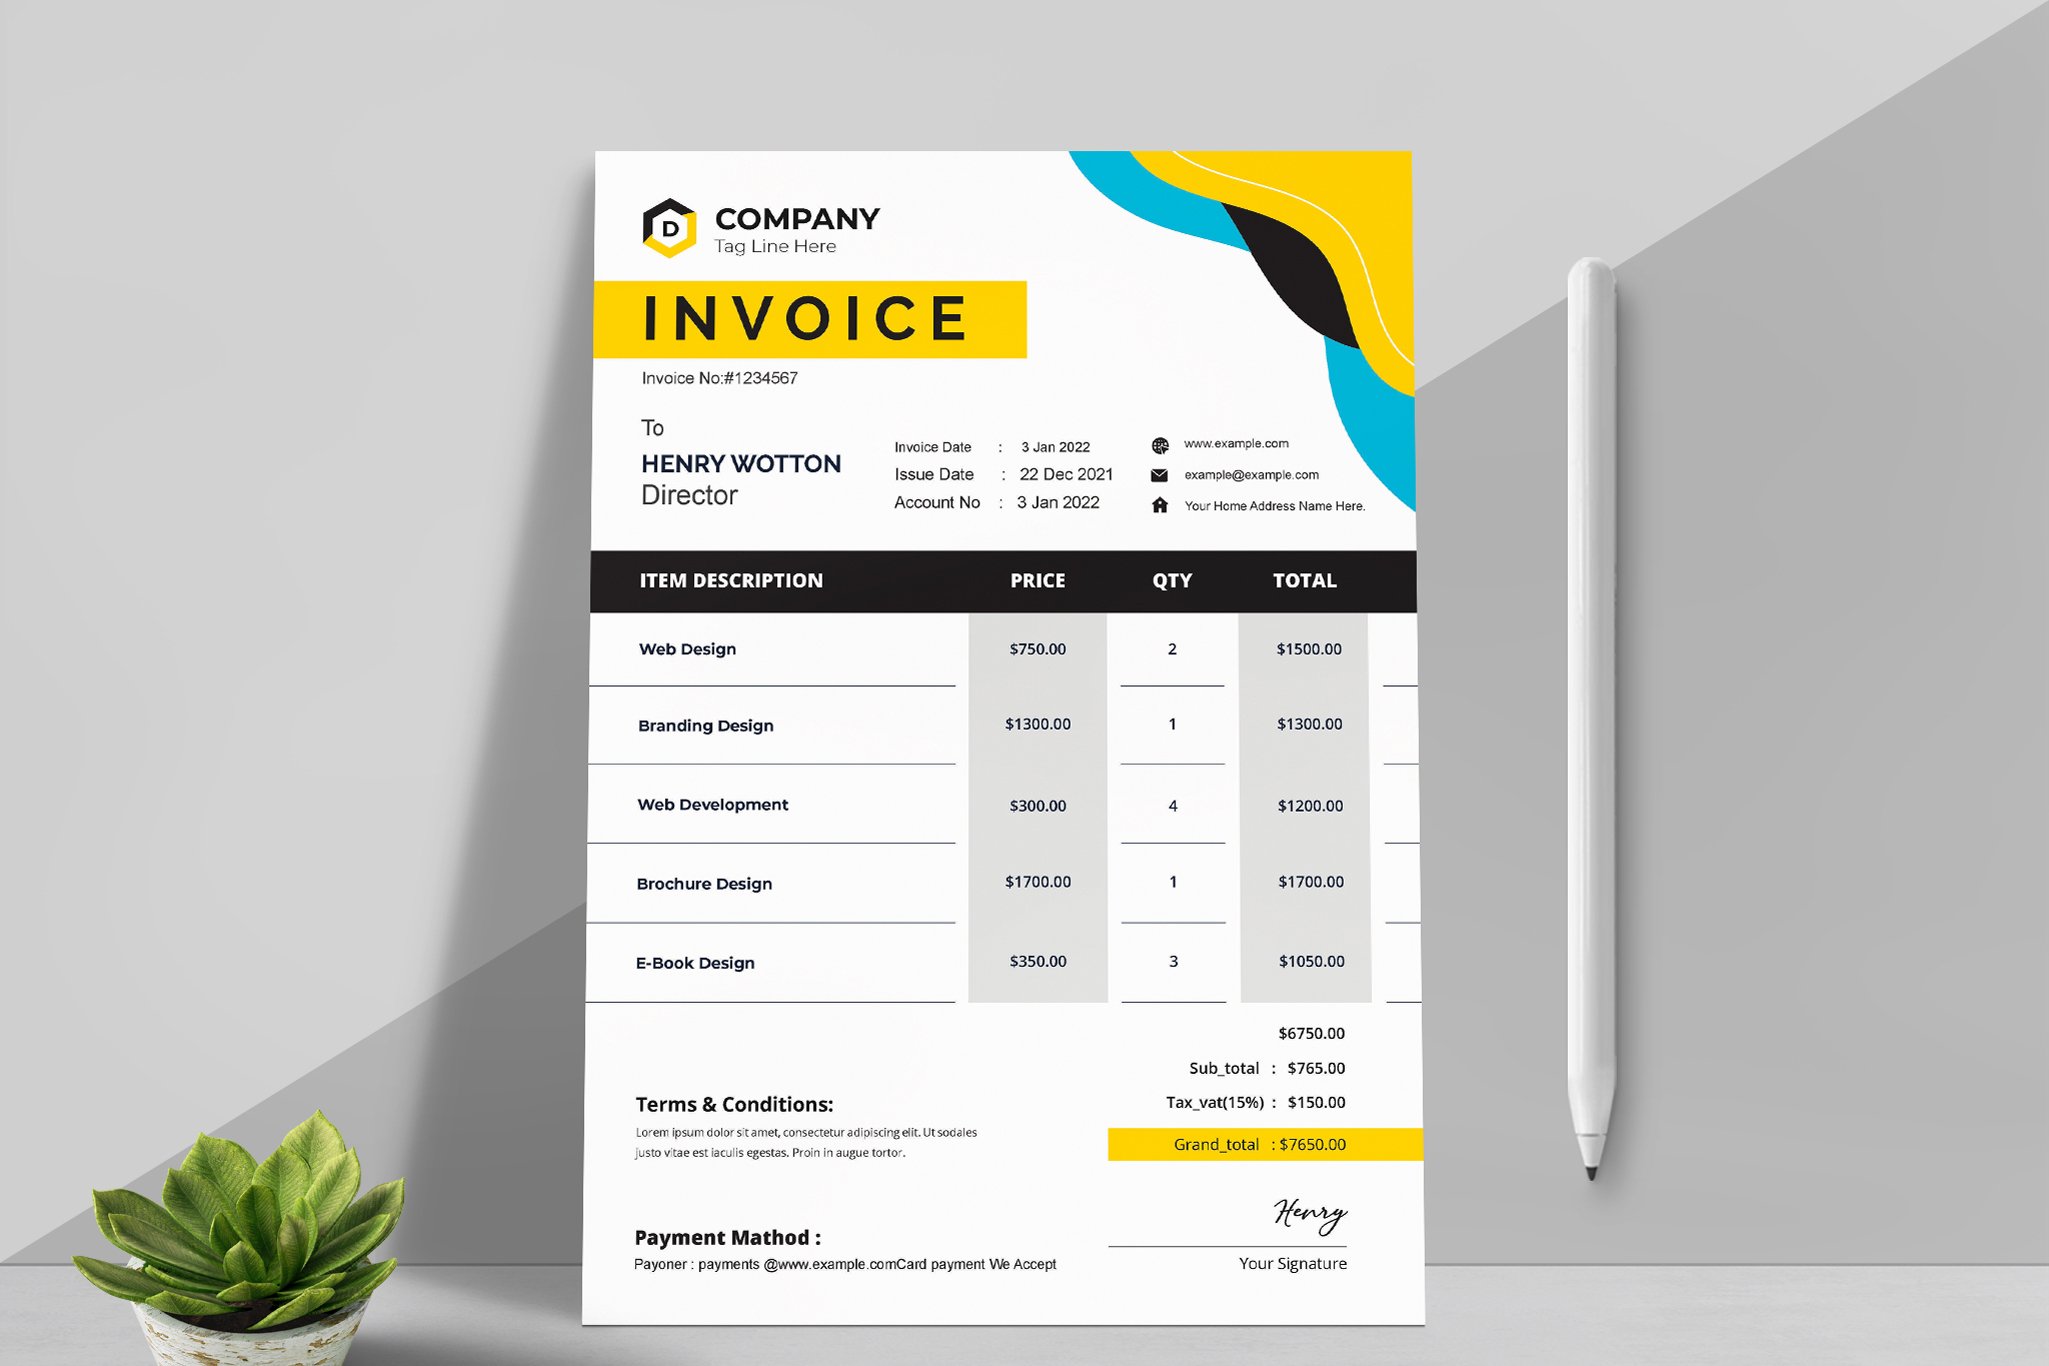 Invoice Layout cover image.